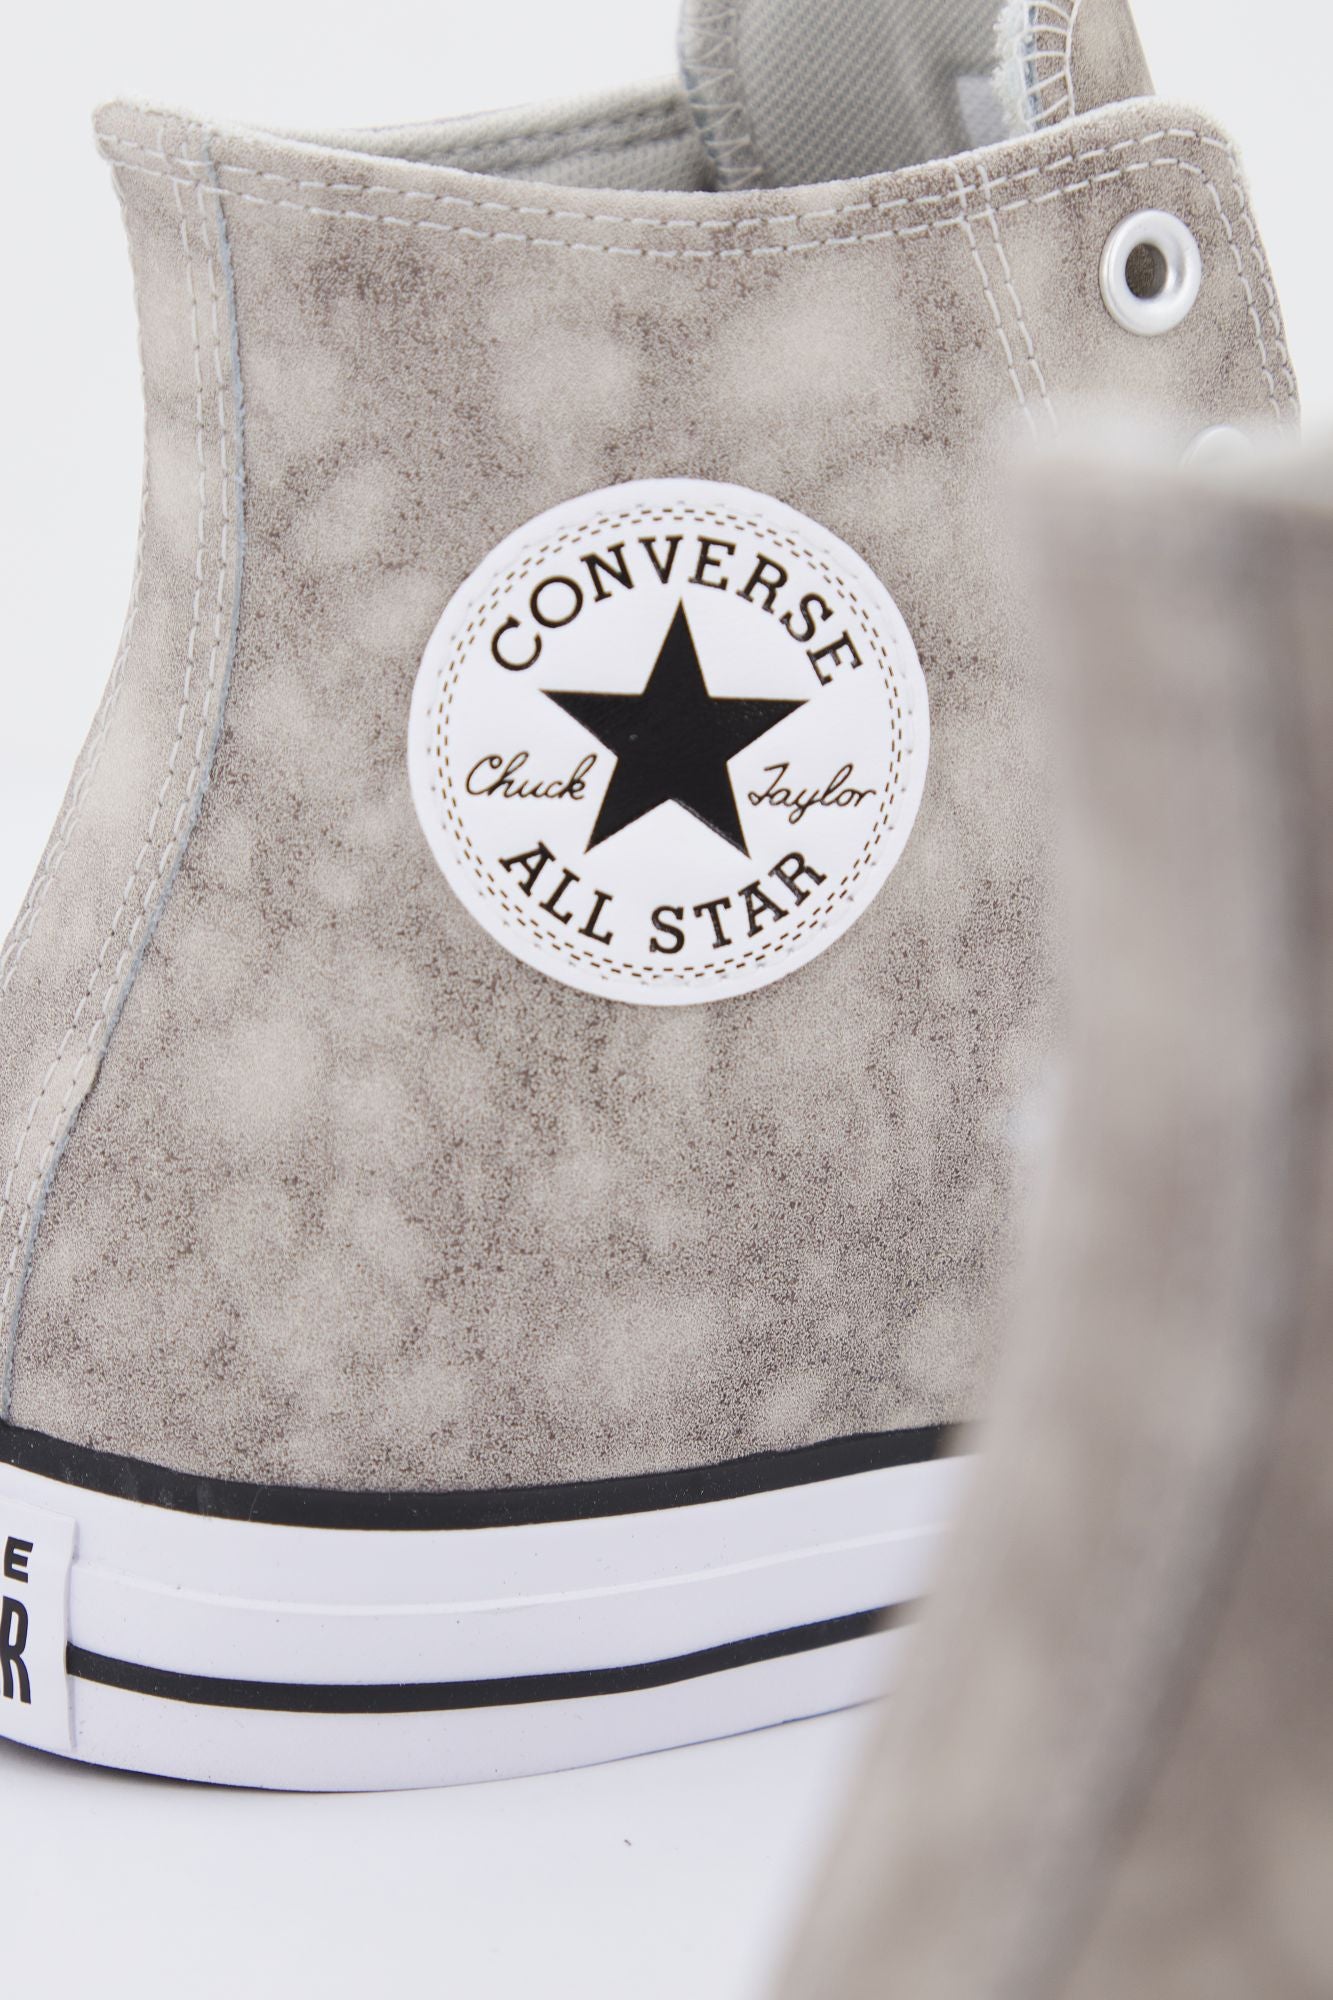 CONVERSE CHUCK TAYLOR ALL STAR DISTRESSED en color BEIS (3)